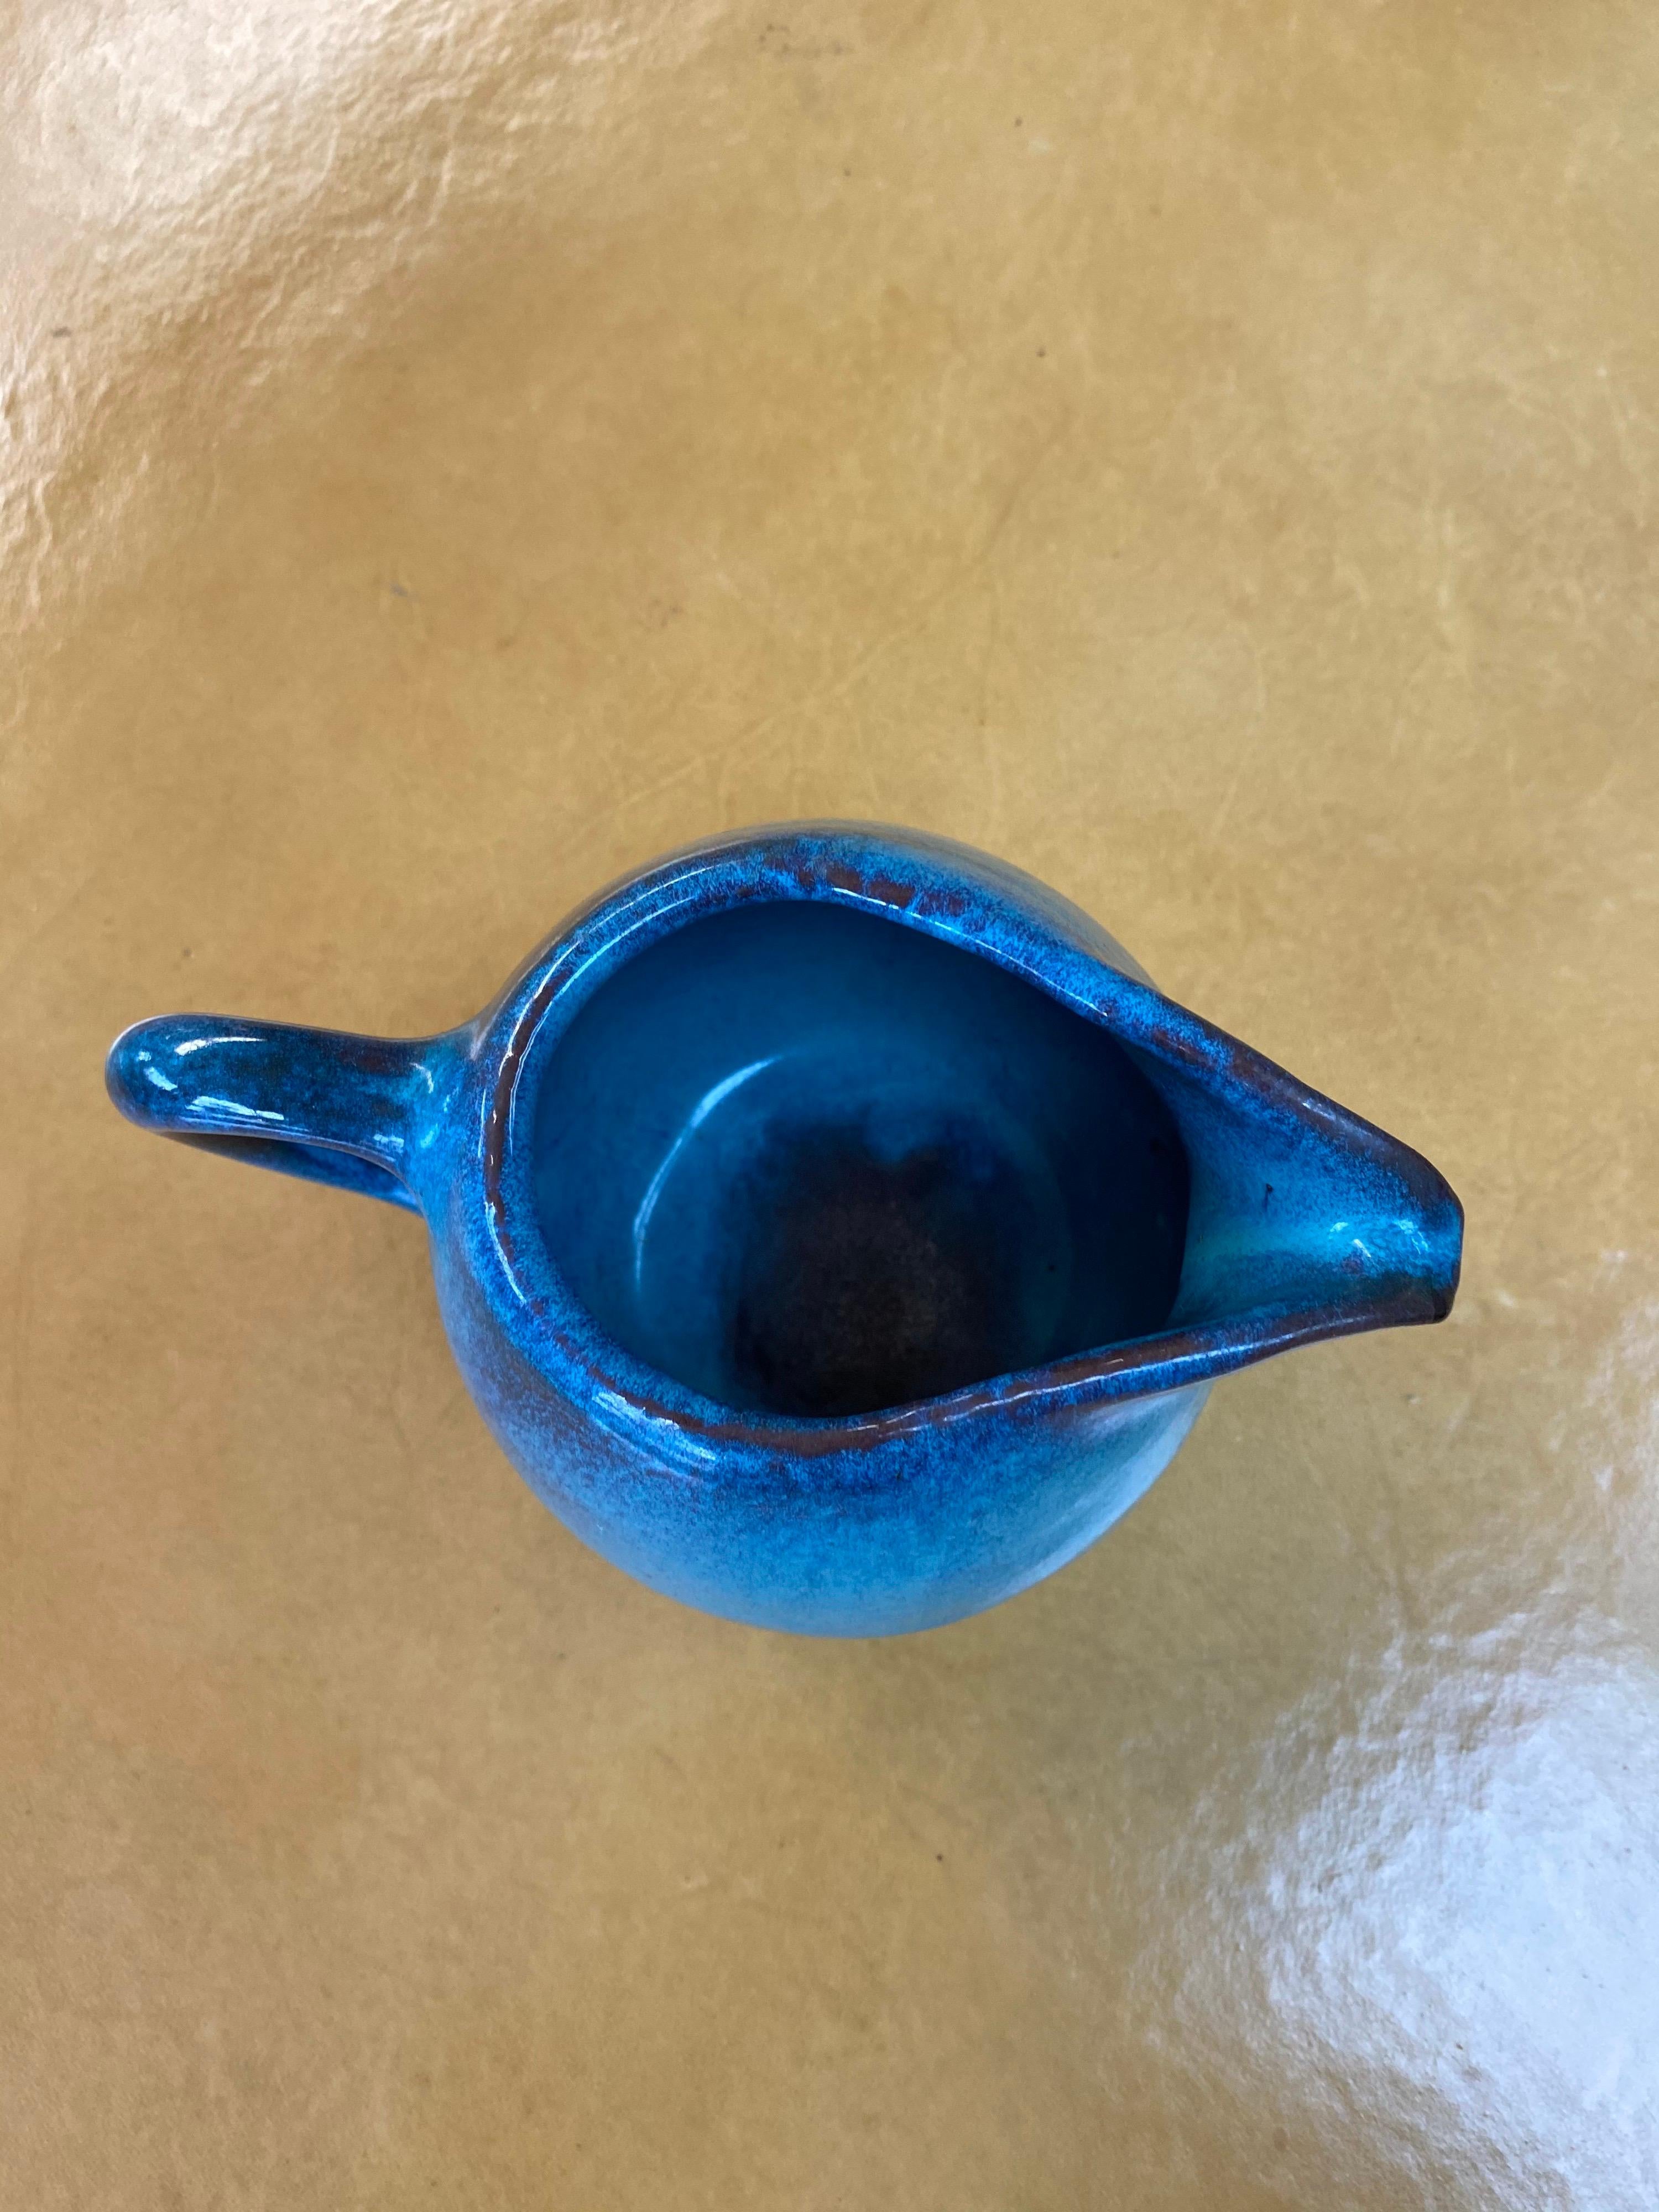 Mid-Century Modern glazed ceramic pitcher by ceramicist Harding Black signed and dated 1971. This ceramic pitcher features a vibrant blue and combination glaze and is in great vintage condition.